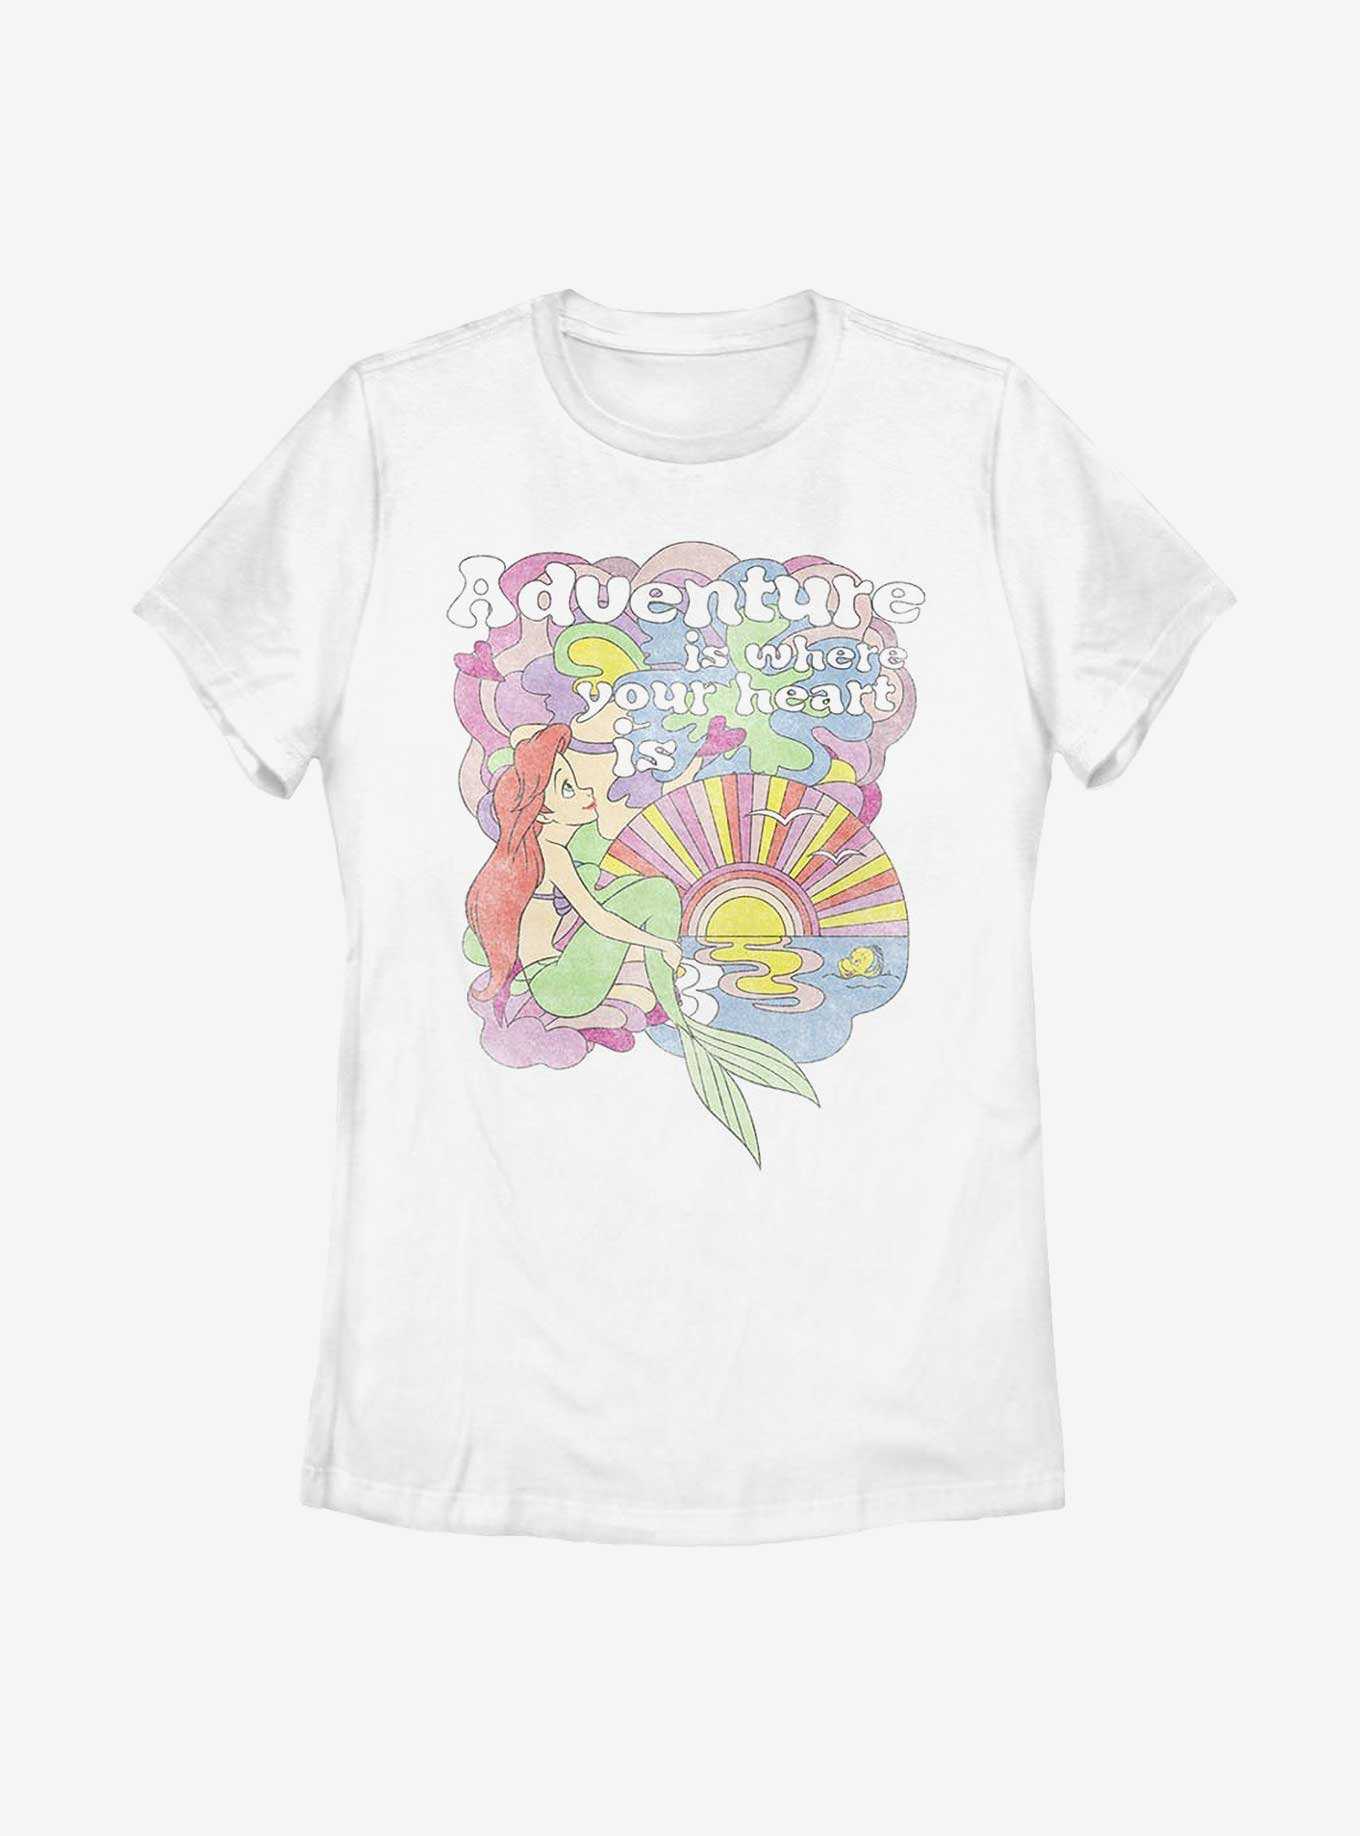 Disney The Little Mermaid Adventure Is Where Your Heart Is Womens T-Shirt, , hi-res